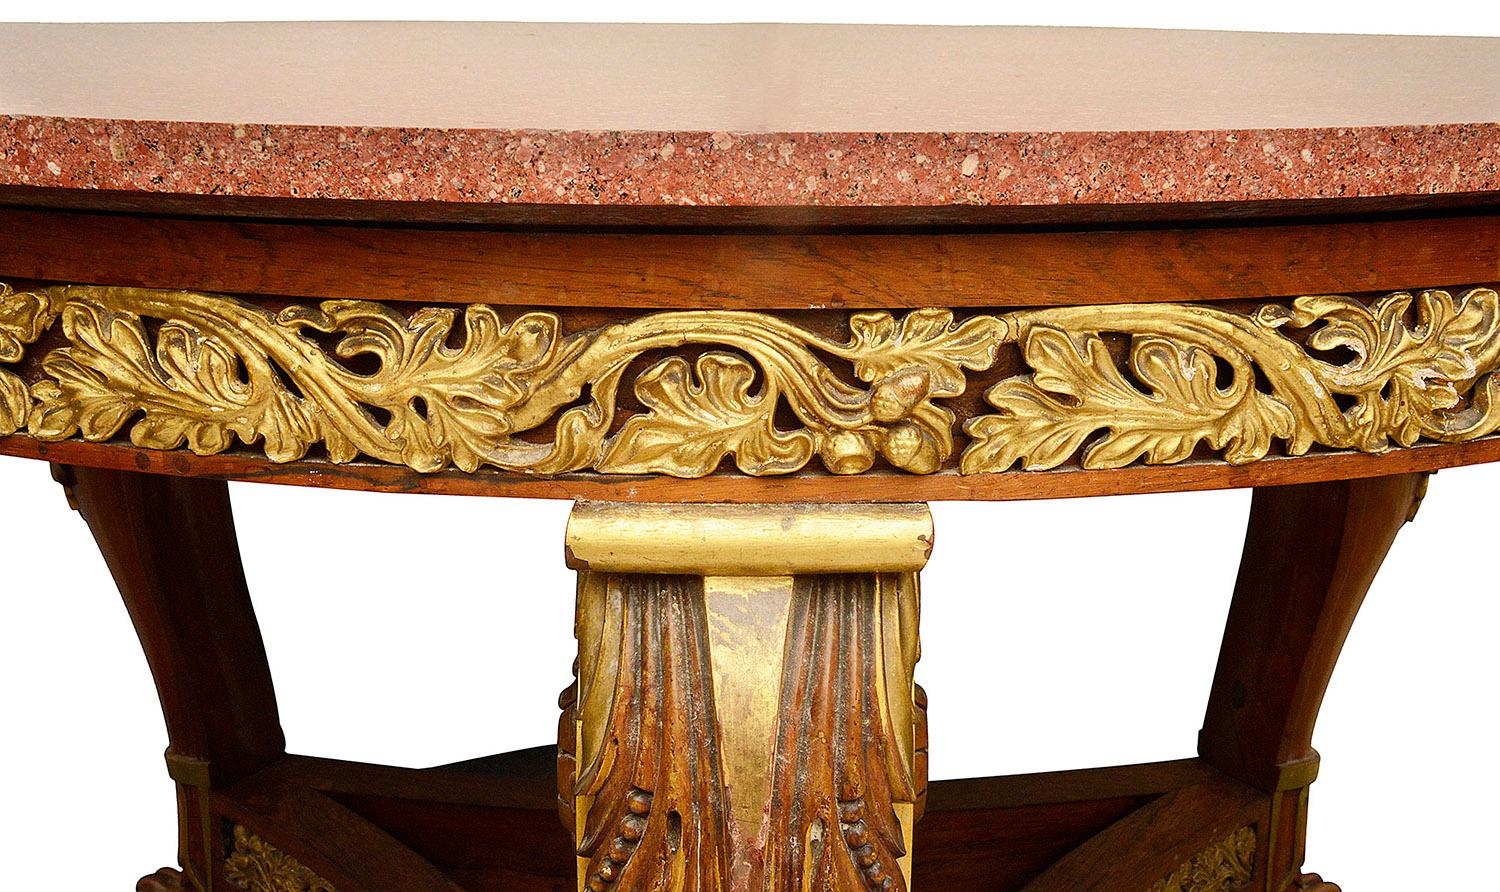 Hand-Carved French 19th Century Empire Style Porphyry Marble Top Center Table For Sale